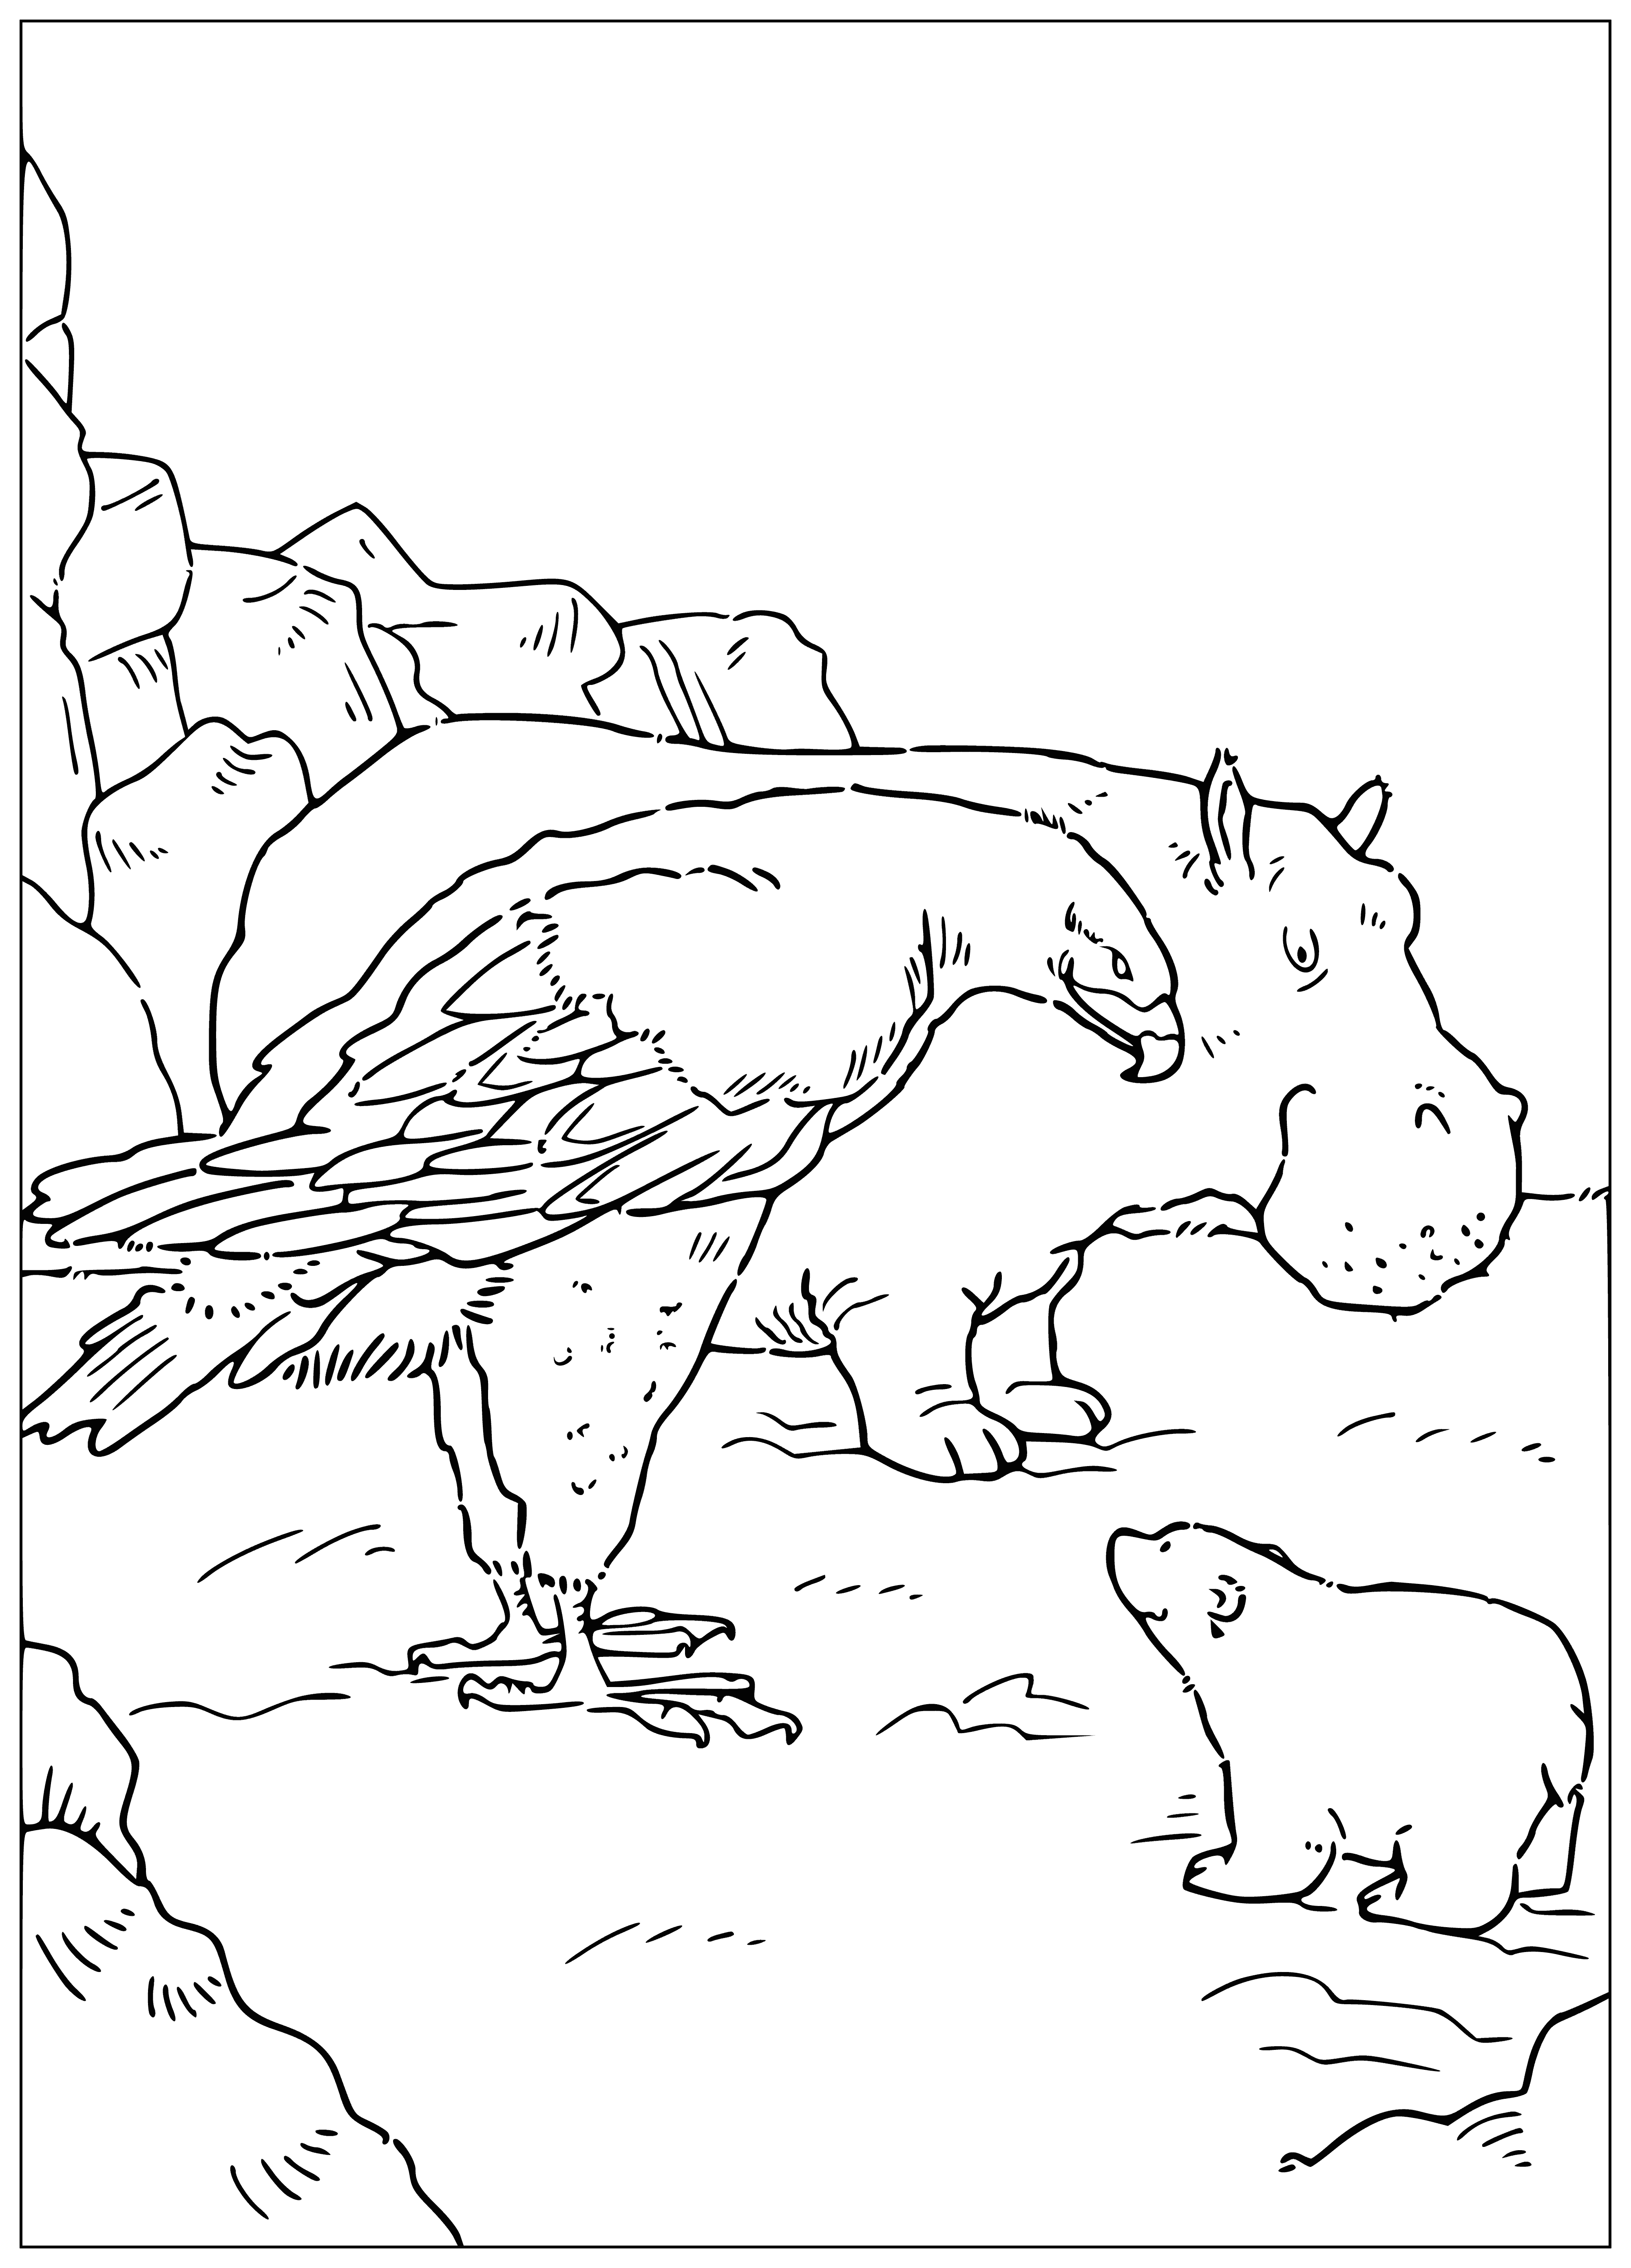 Eagle and Lars coloring page